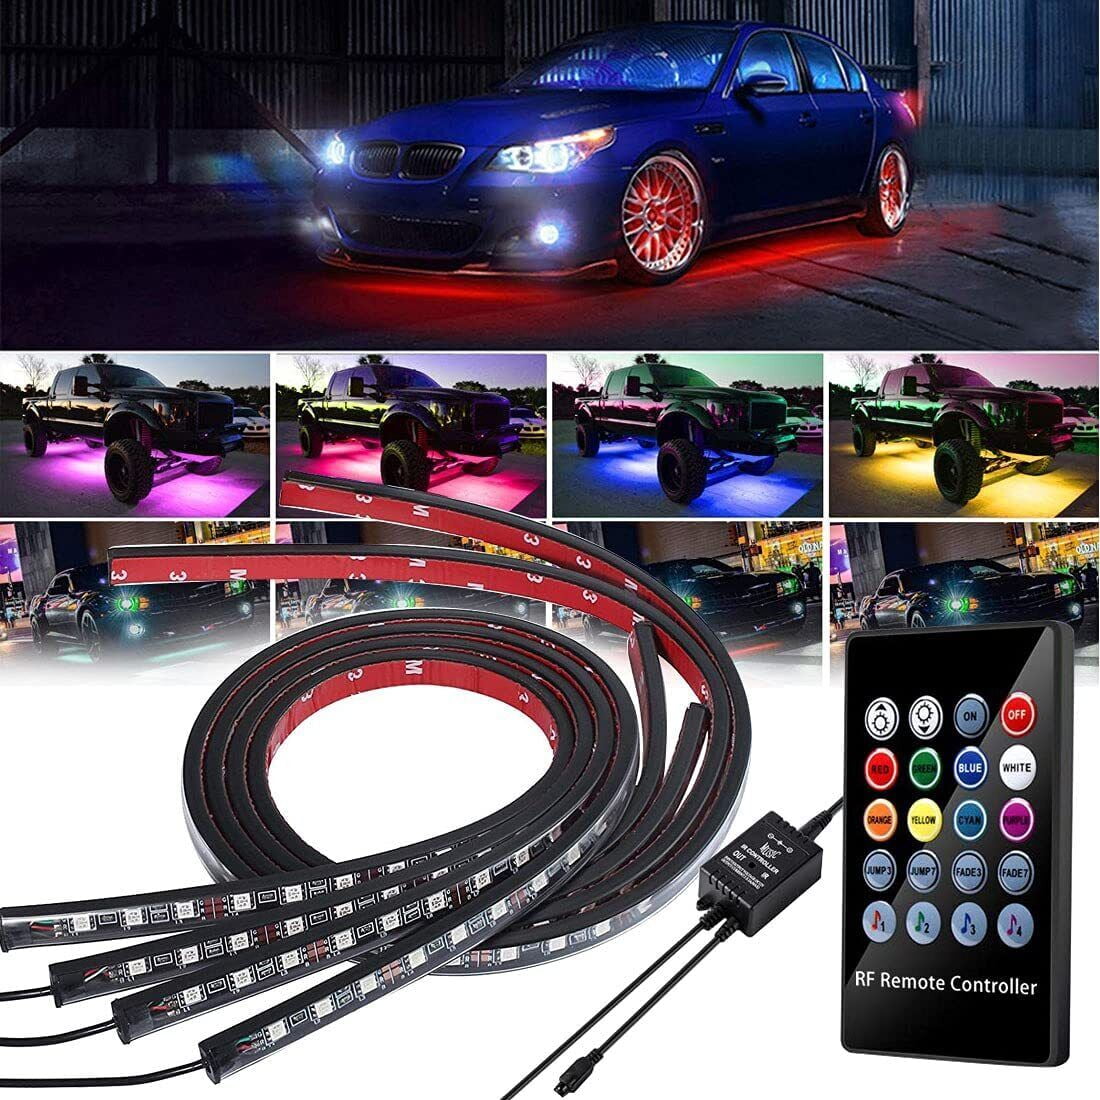  Car Led Strip Lights,Interior Lights,Ambient Lighting Kit With  RGB 16 Million Colors Fiber Optics&Music Sync Rhythm,USB Neon Light  Accessories for Center Console&Dashboard,Upgraded Version : Automotive